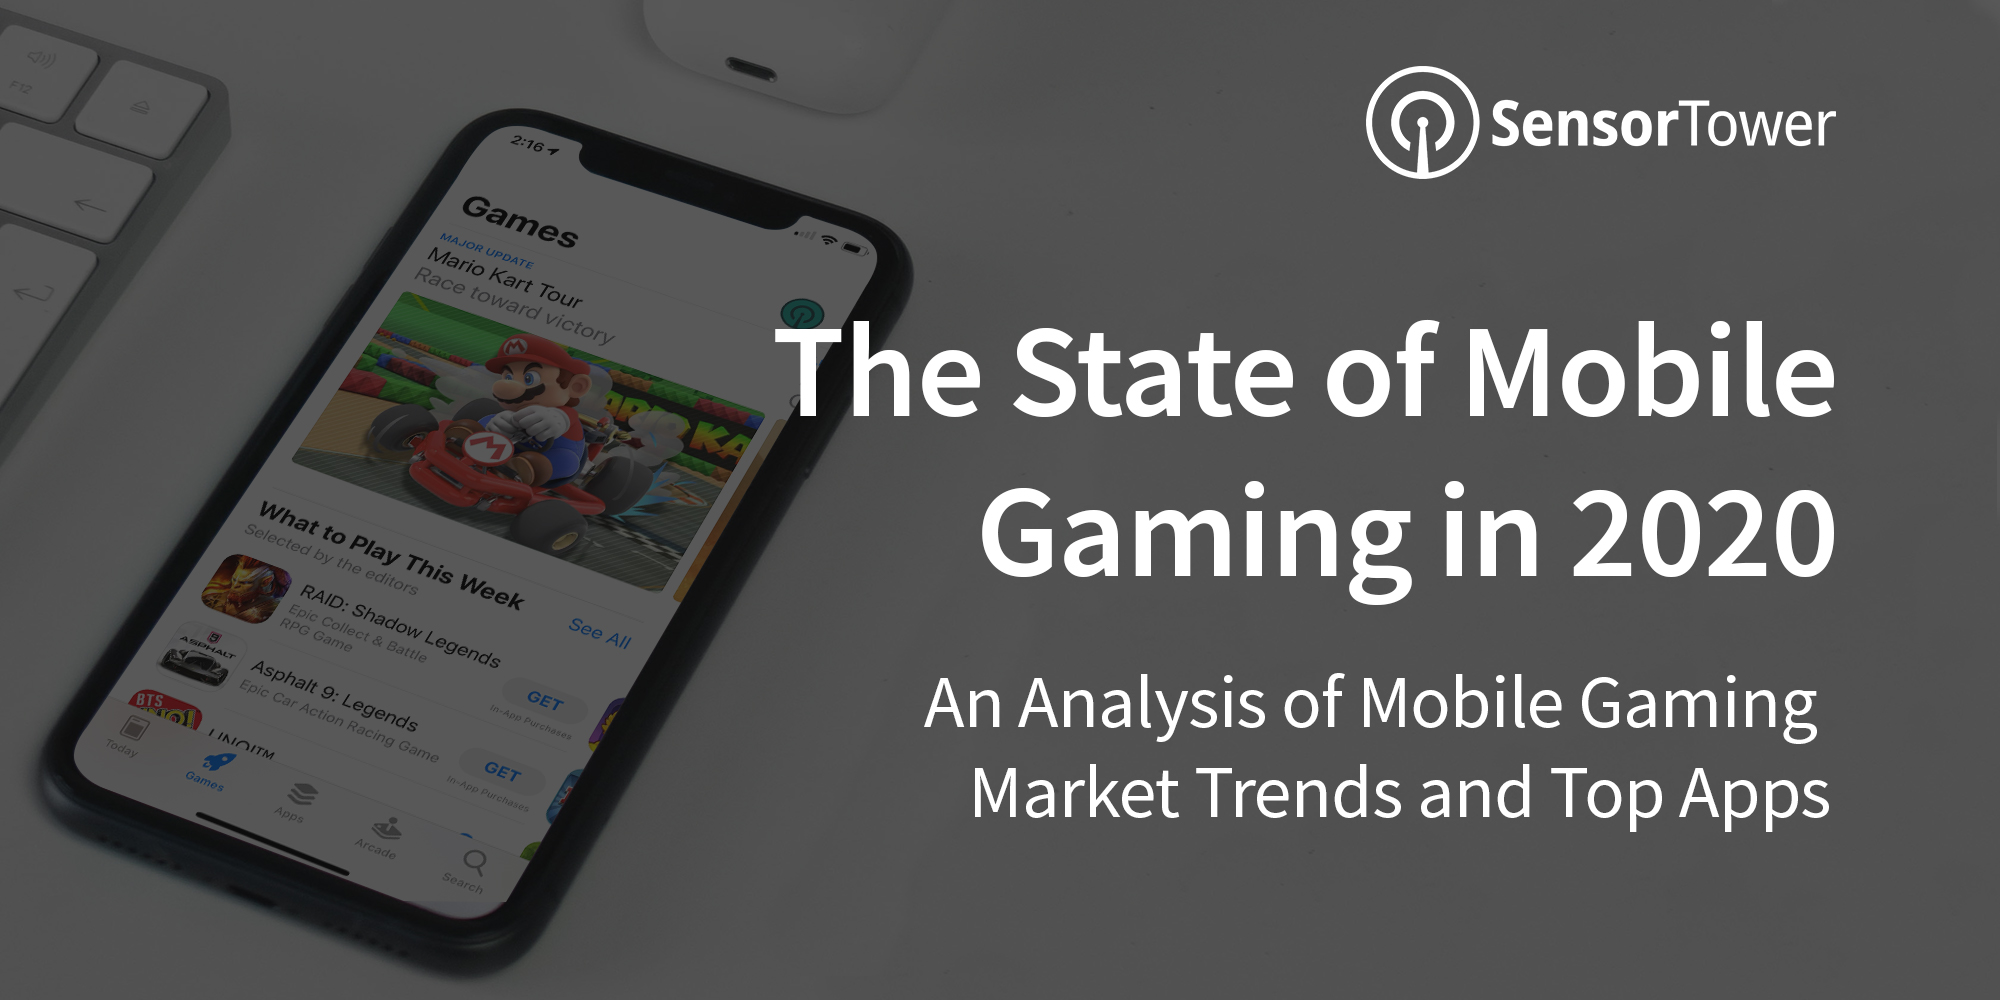 The State of Mobile Gaming in 2020